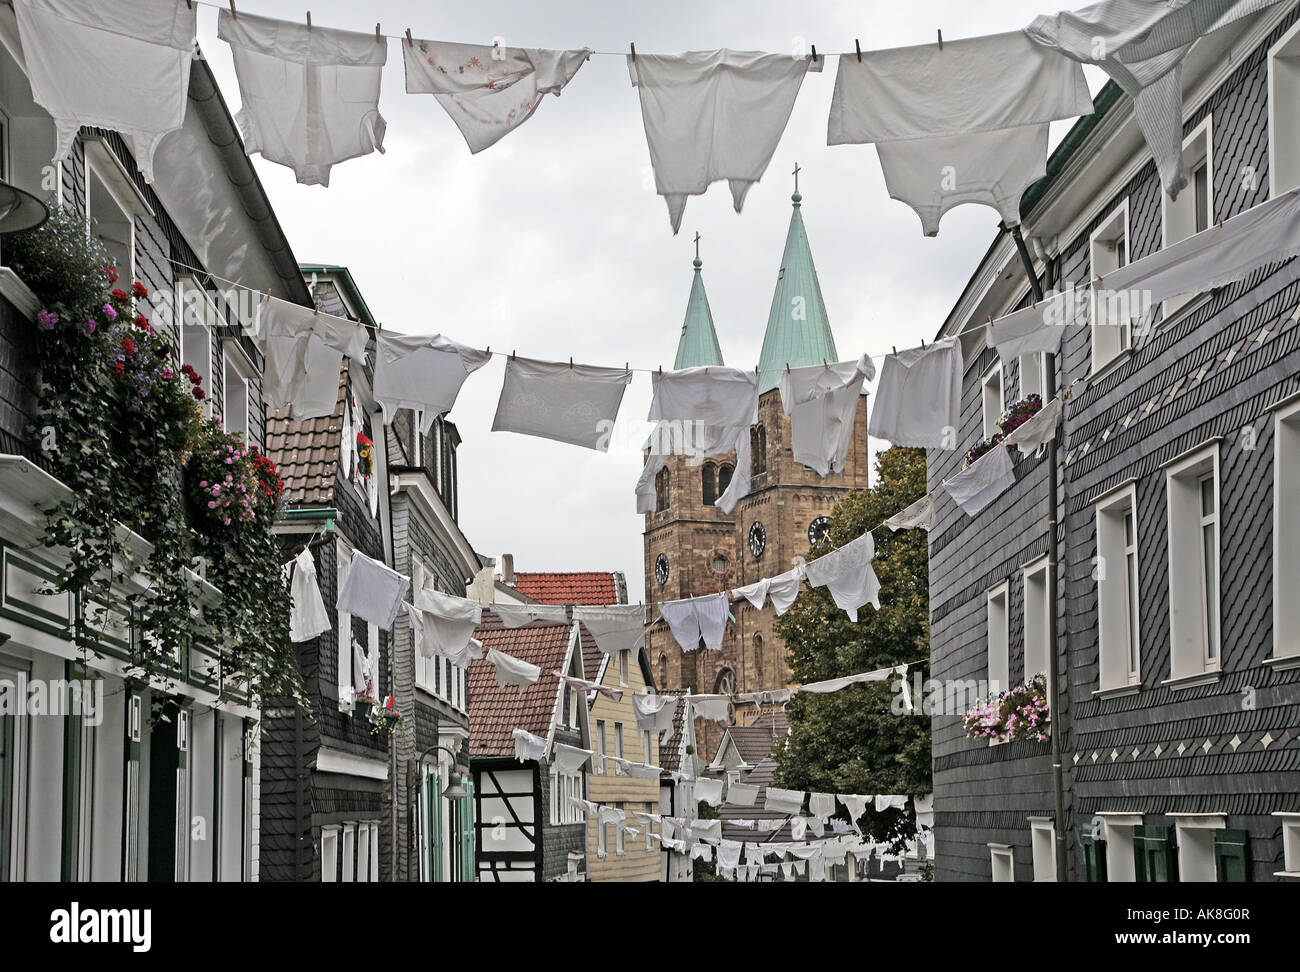 tradional festive day in Schwelm with white laundry hanging in the street, Germany, North Rhine-Westphalia, Ruhr Area, Schwelm Stock Photo